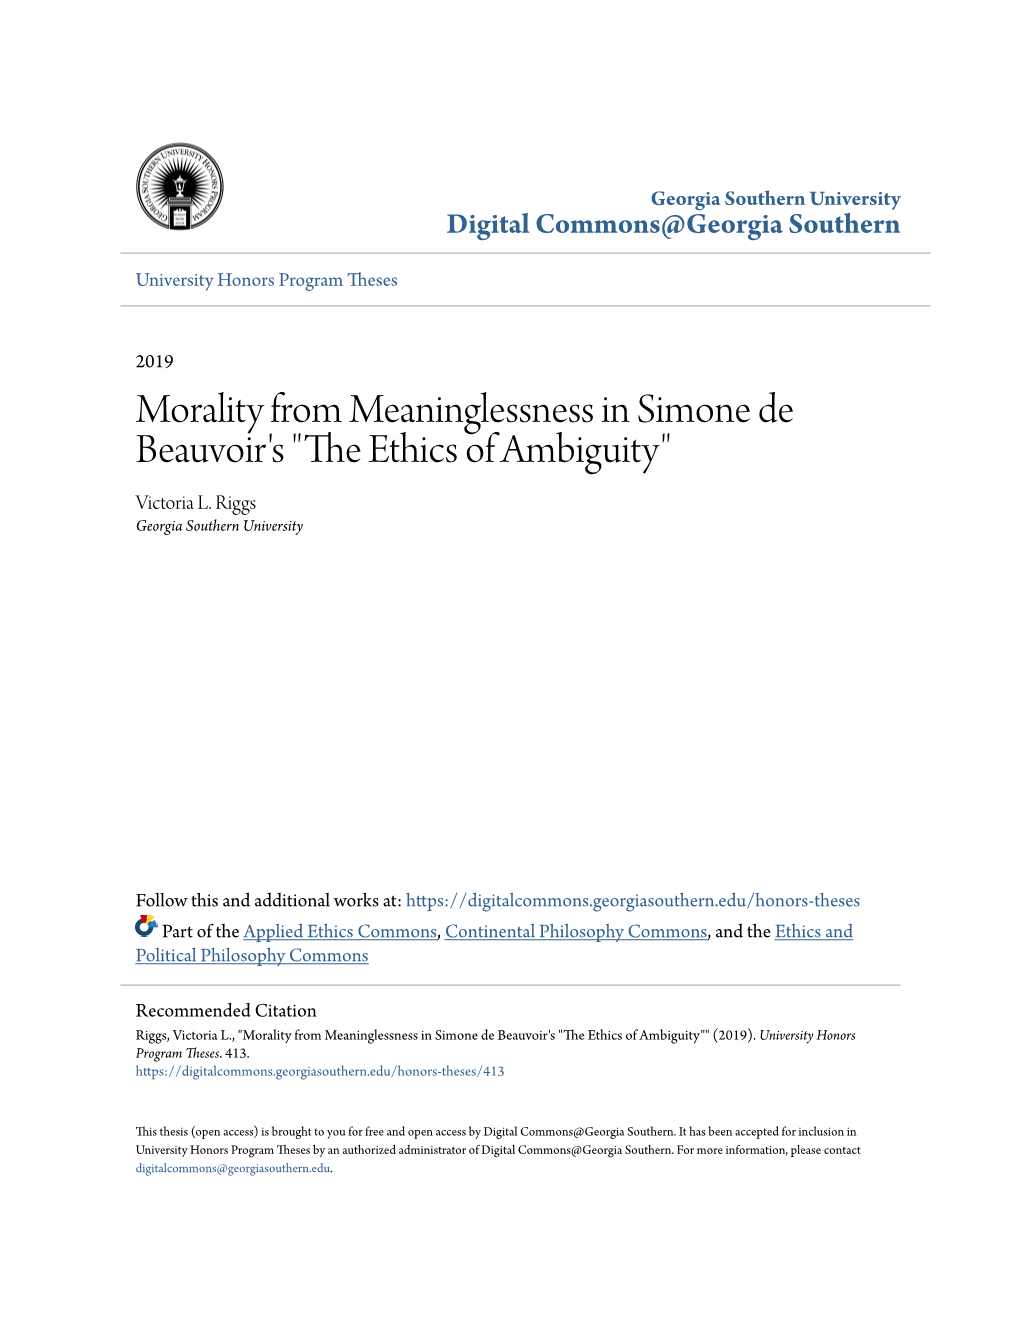 Morality from Meaninglessness in Simone De Beauvoir's "The Thice S of Ambiguity" Victoria L